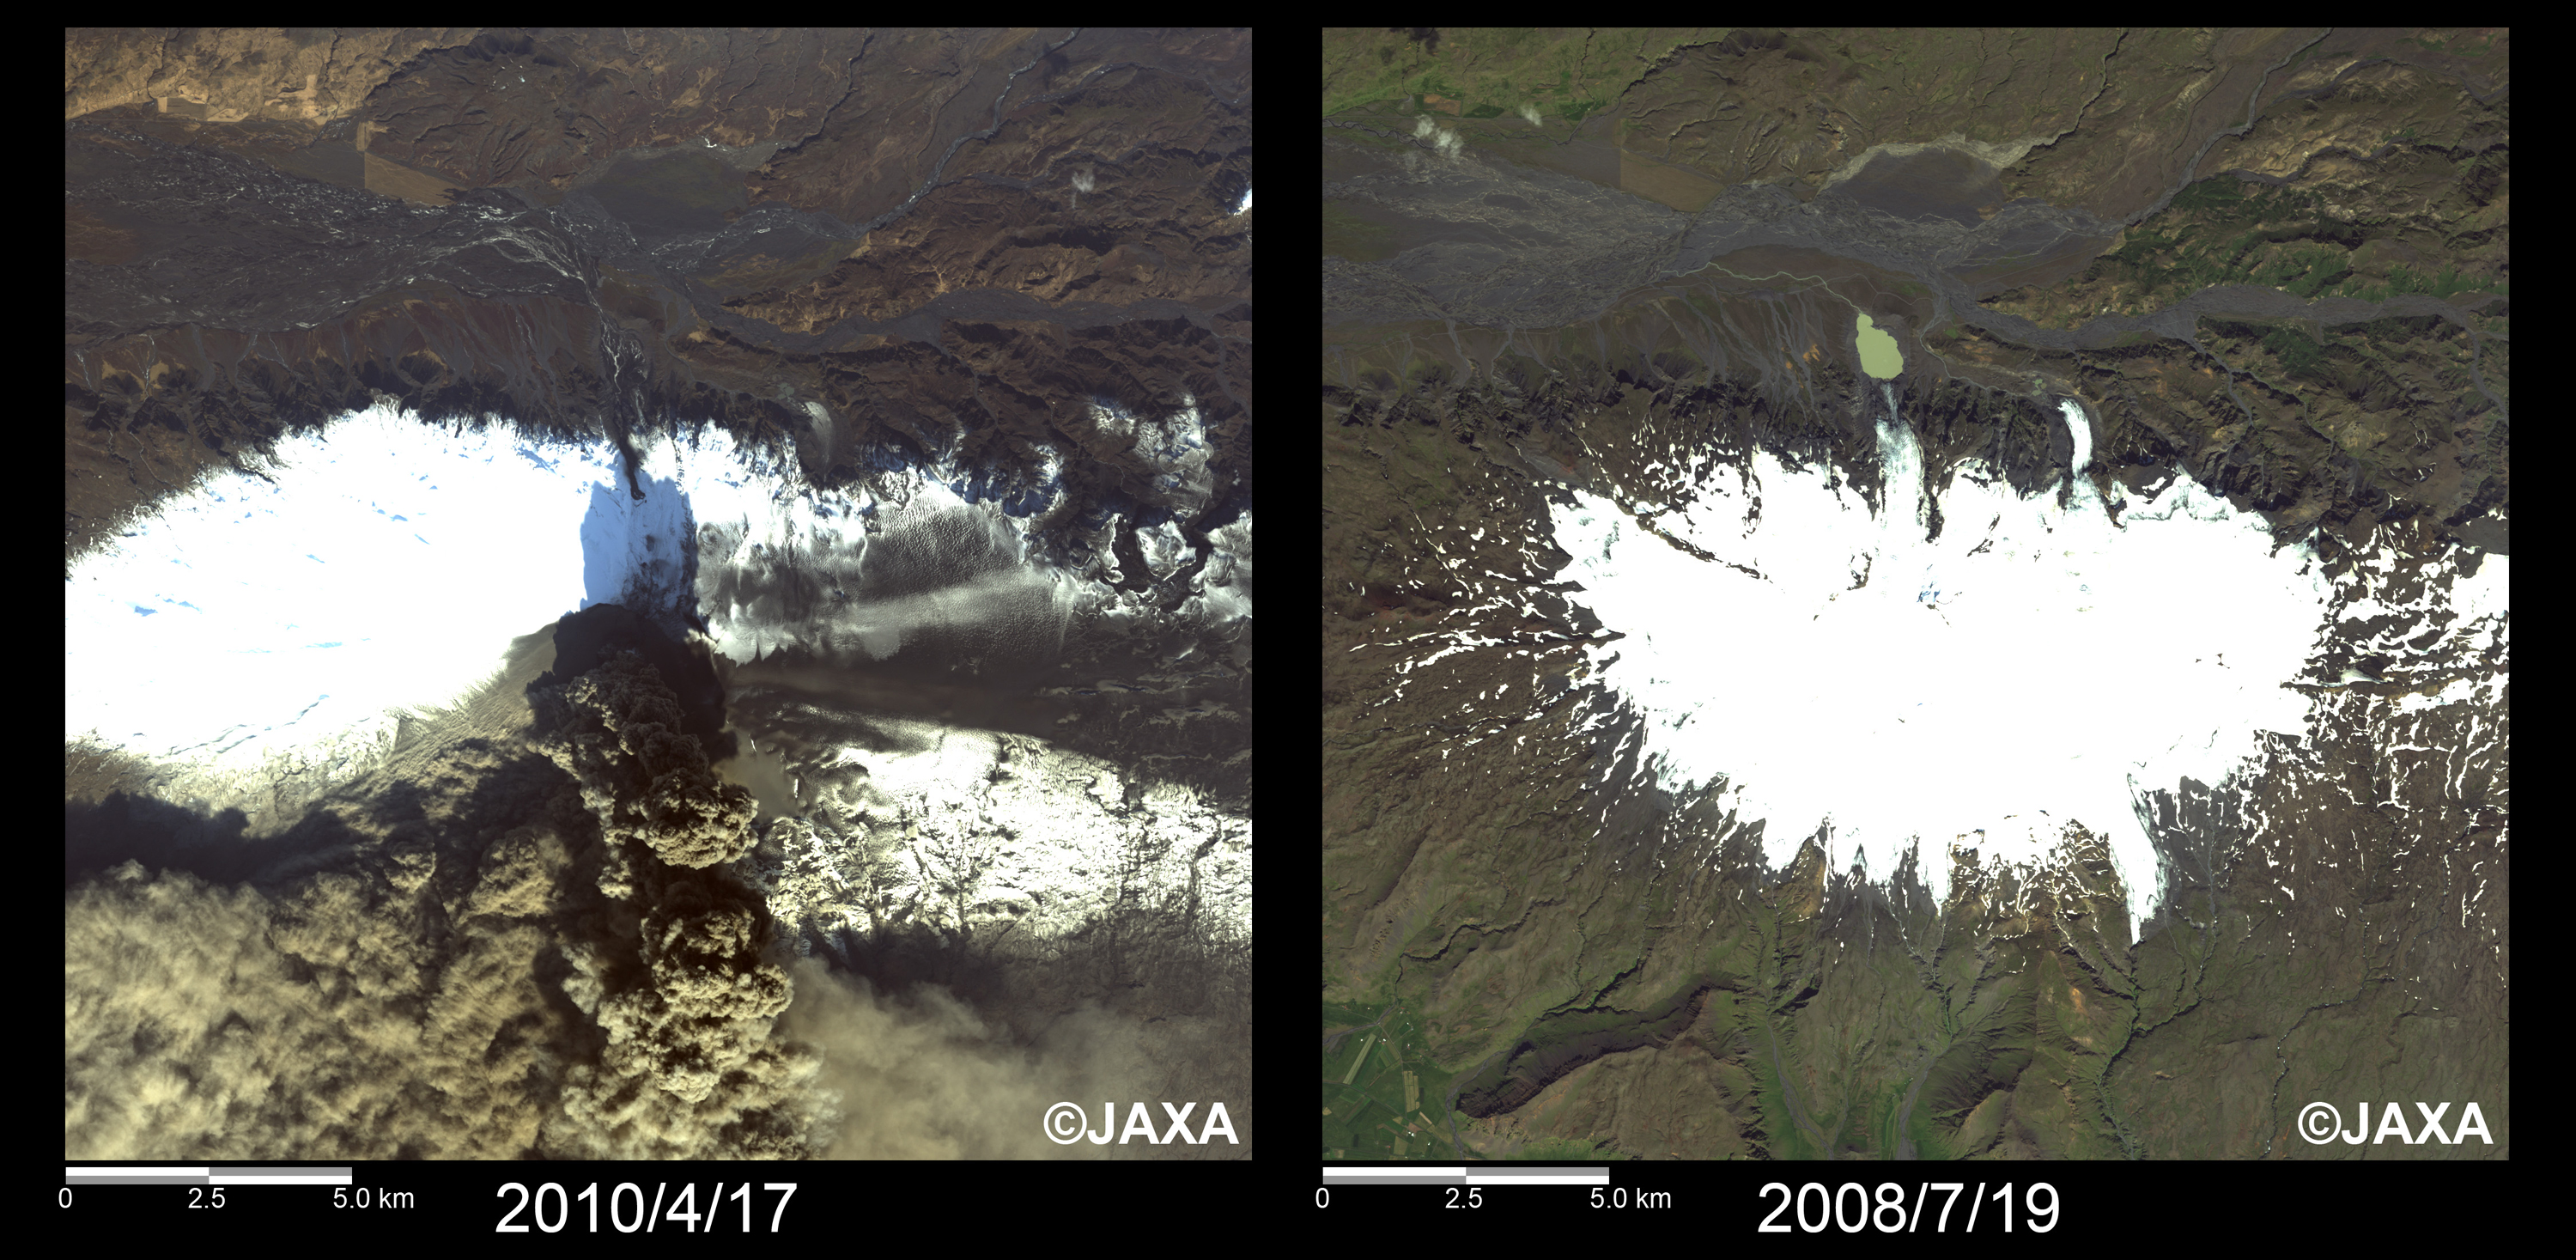 Fig. 2: Enlaged images around the crater of the Eyjafjallajökull volcano (20 km squares, Left: April 17, 2010; right: July 19, 2008).